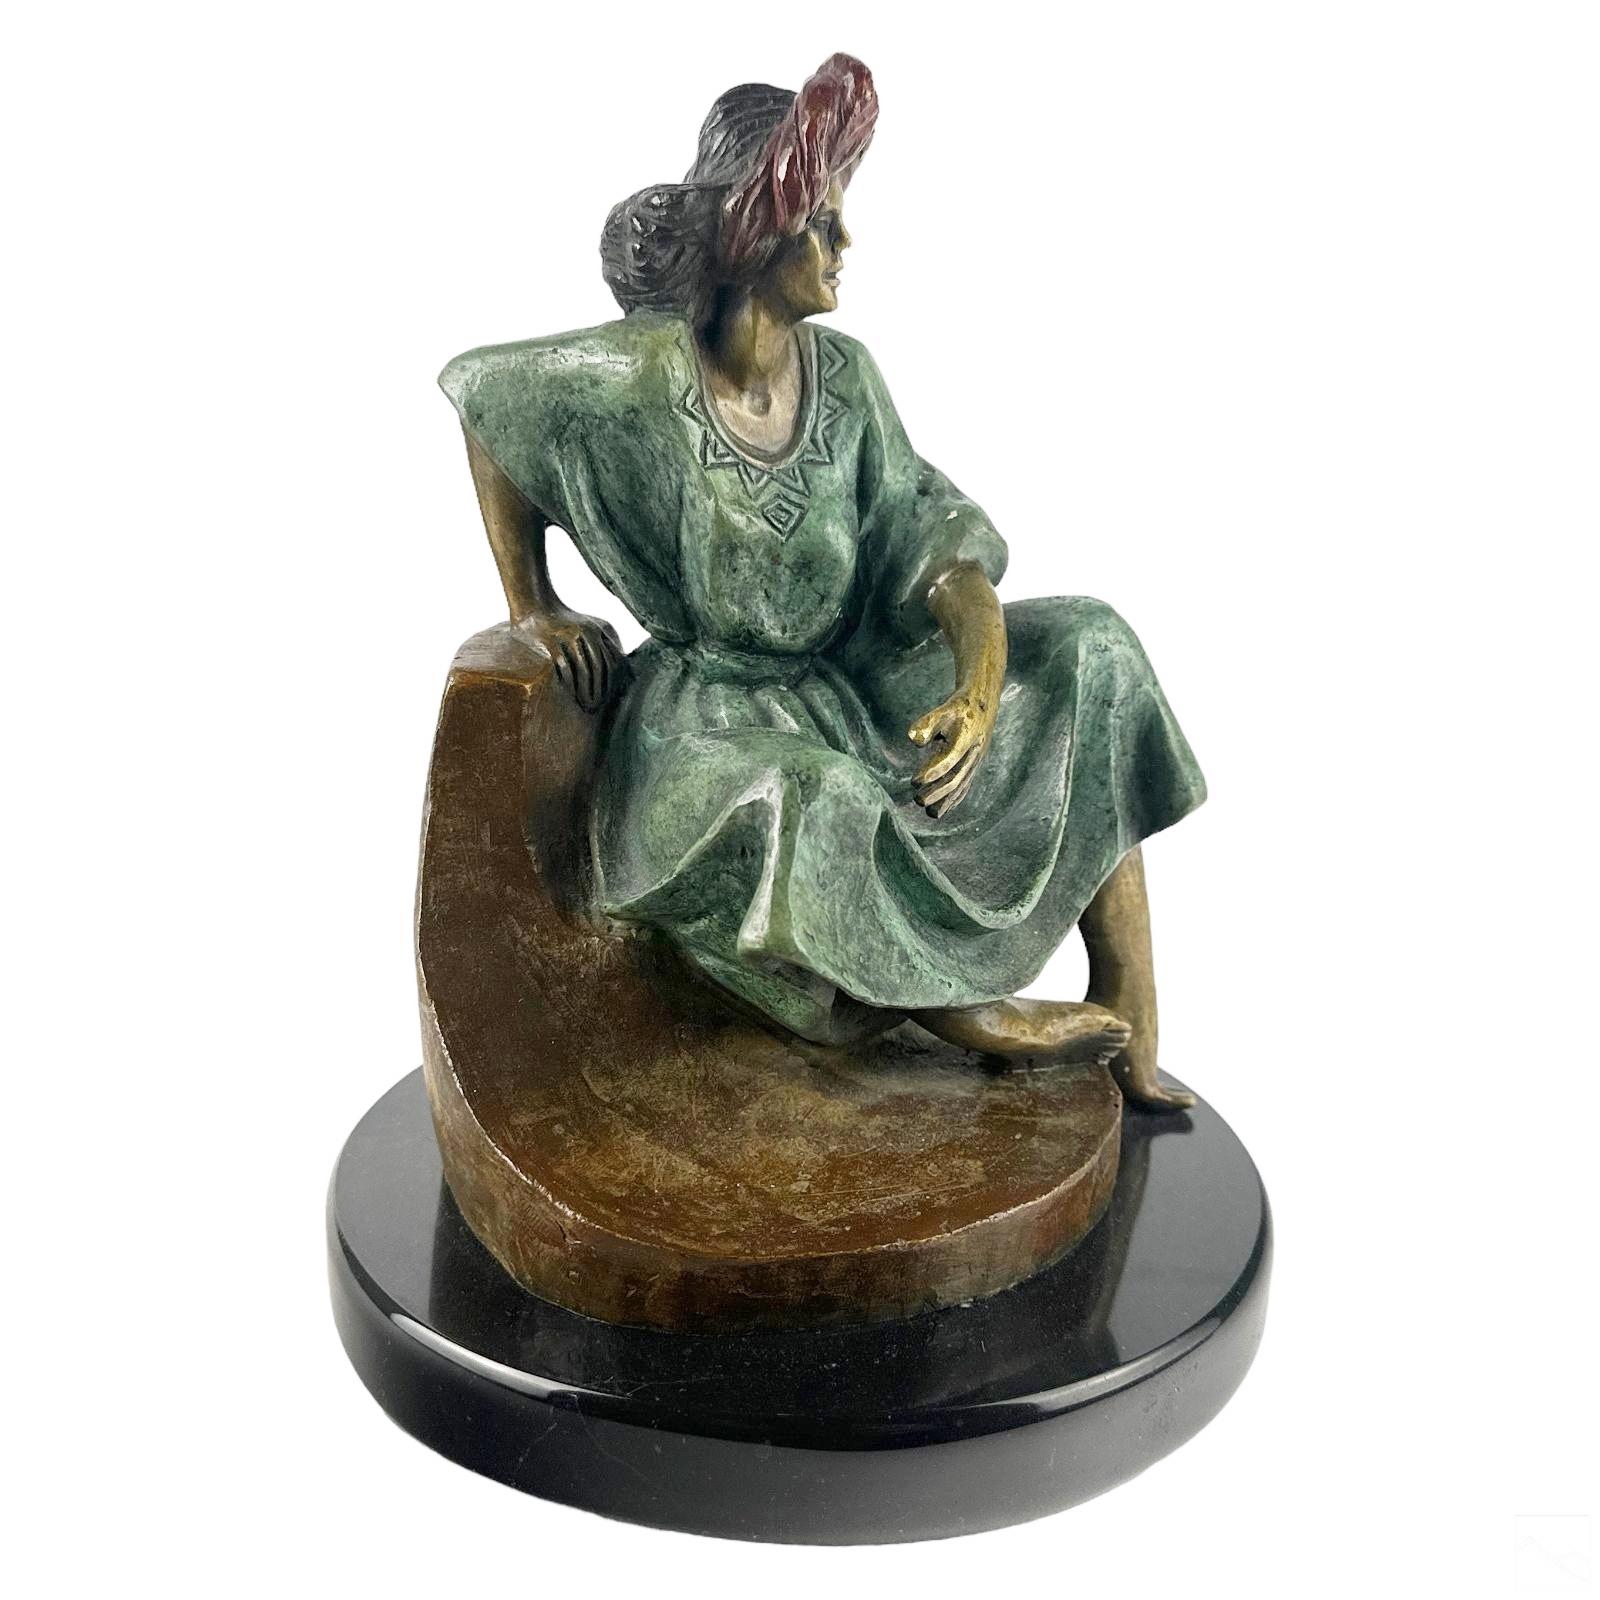 Victor Gutierrez (Mexican, Born 1950). A limited edition cold painted bronze statue. A figural work produced in a modern style depicting a seated female figure in traditional Mestizo style costume, with a red head wrap, modeled on a Modernist base.